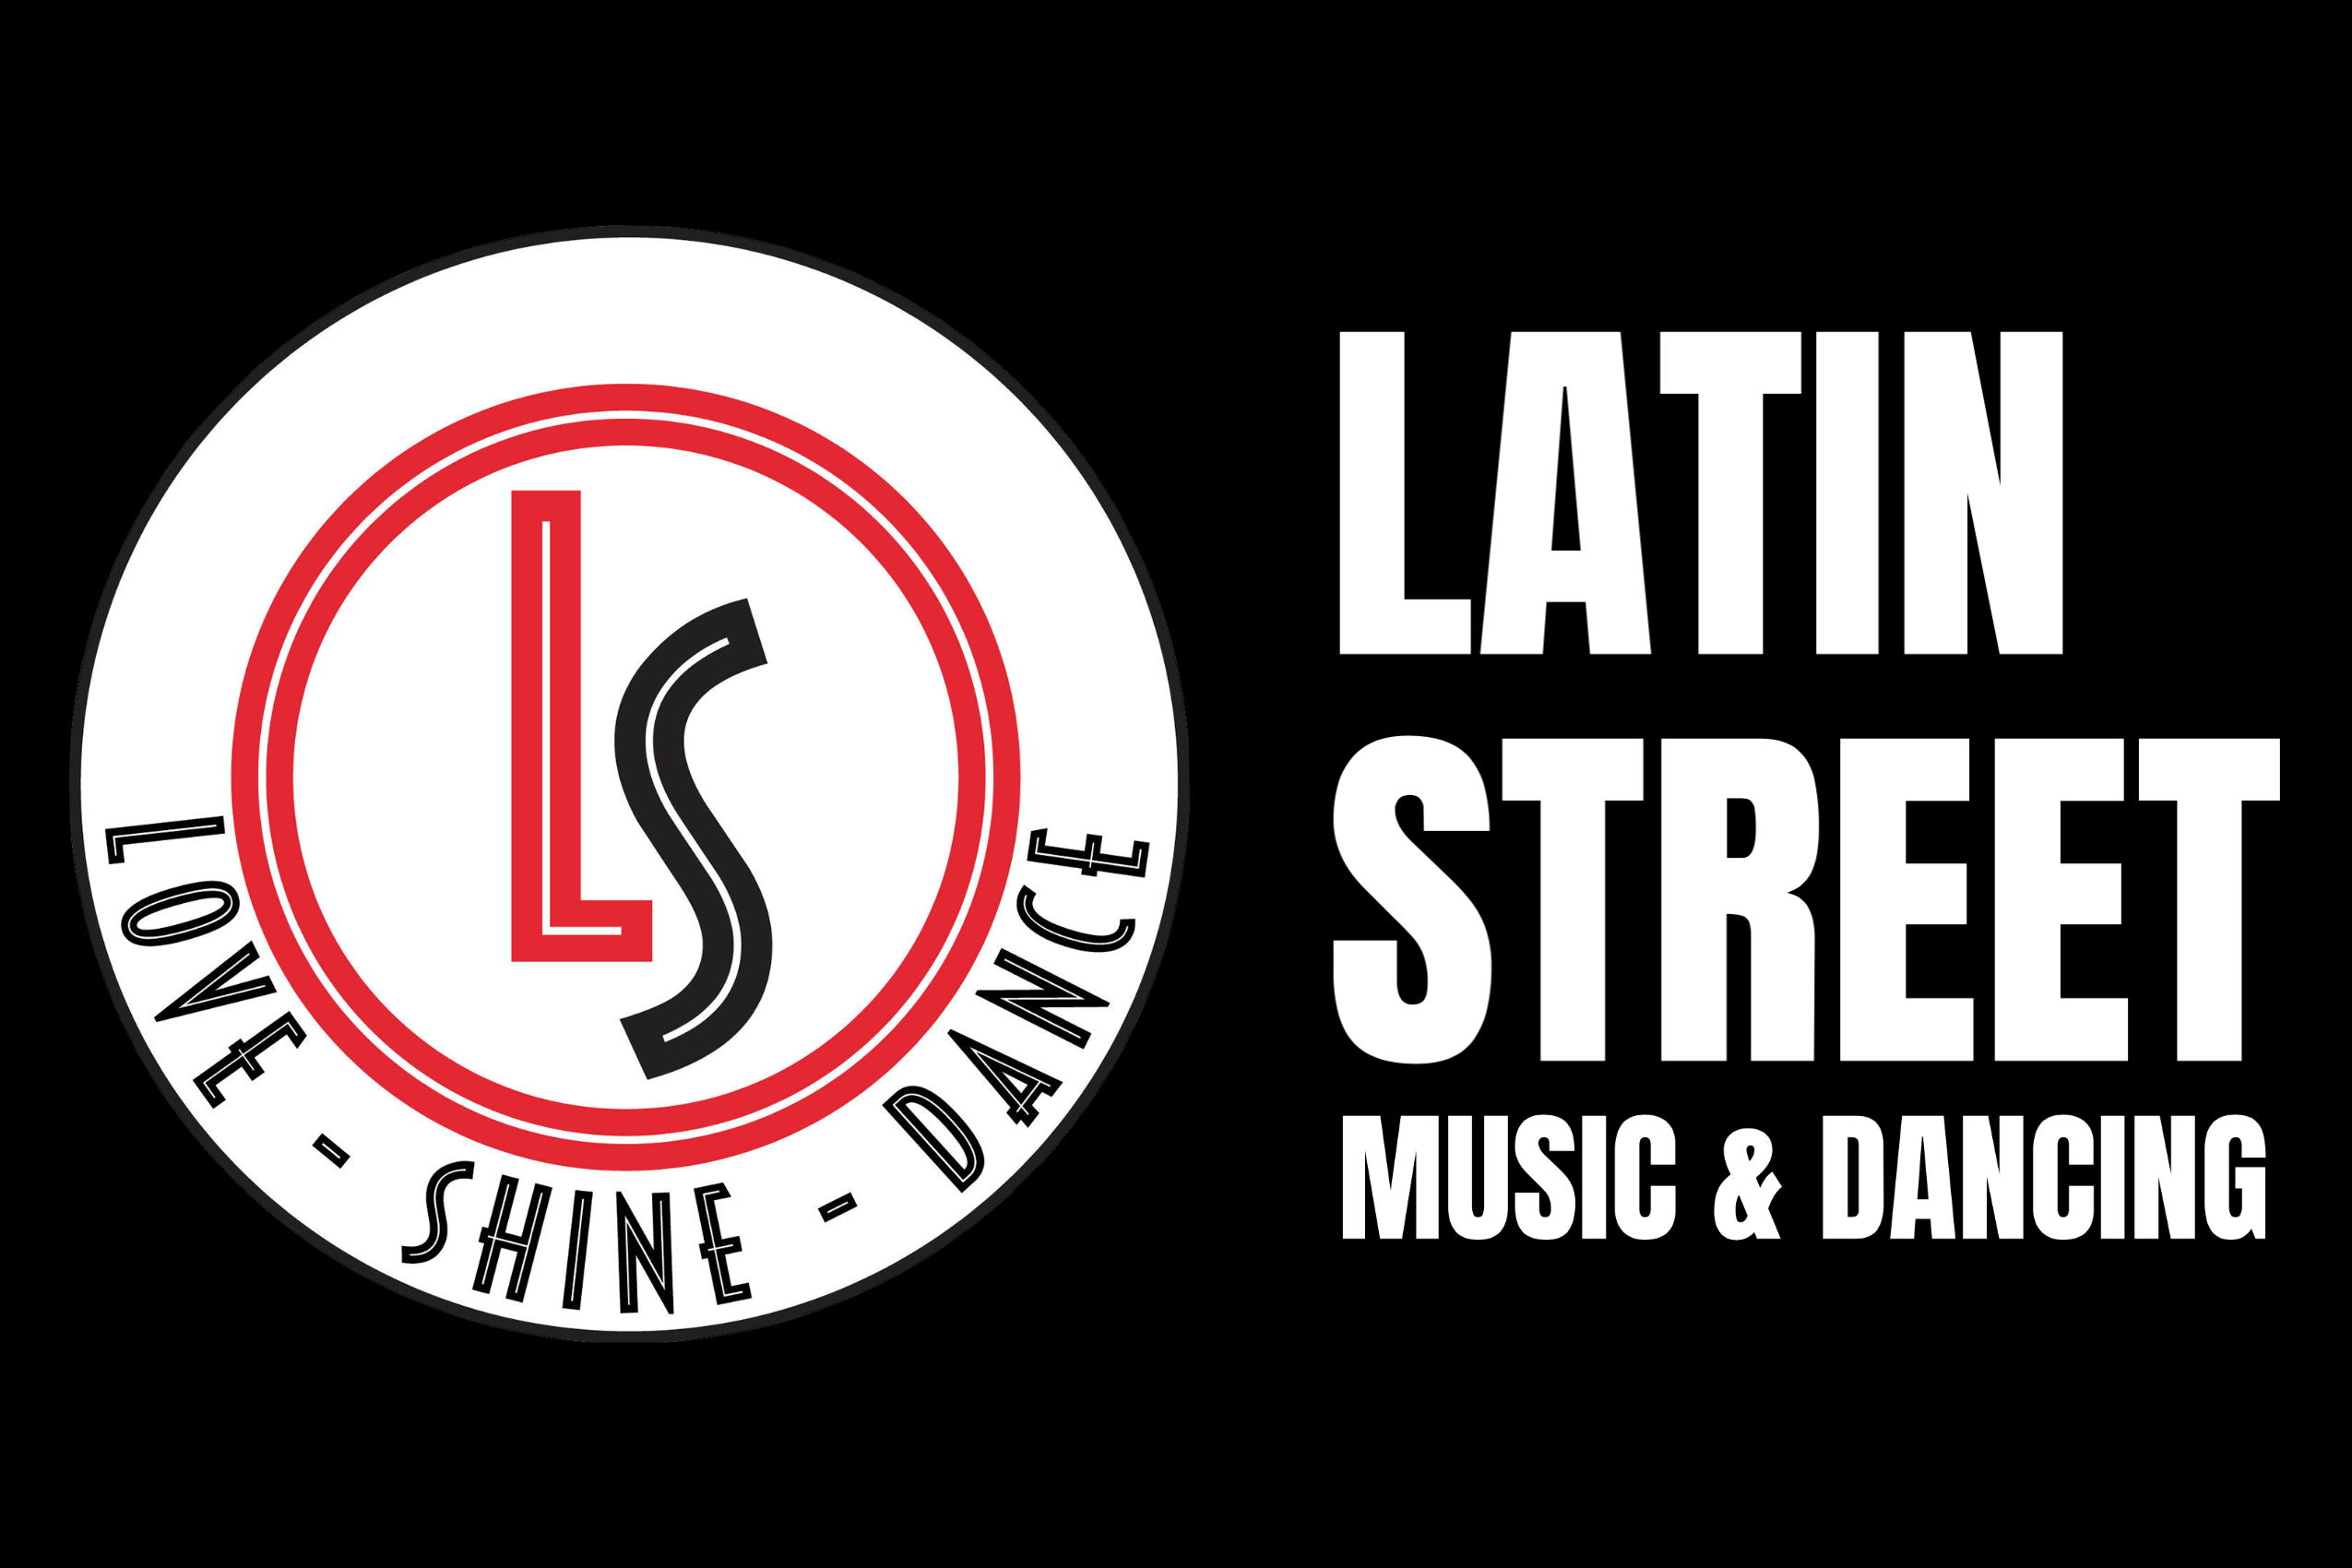 Privacy Policy » Latin Street Music & Dancing